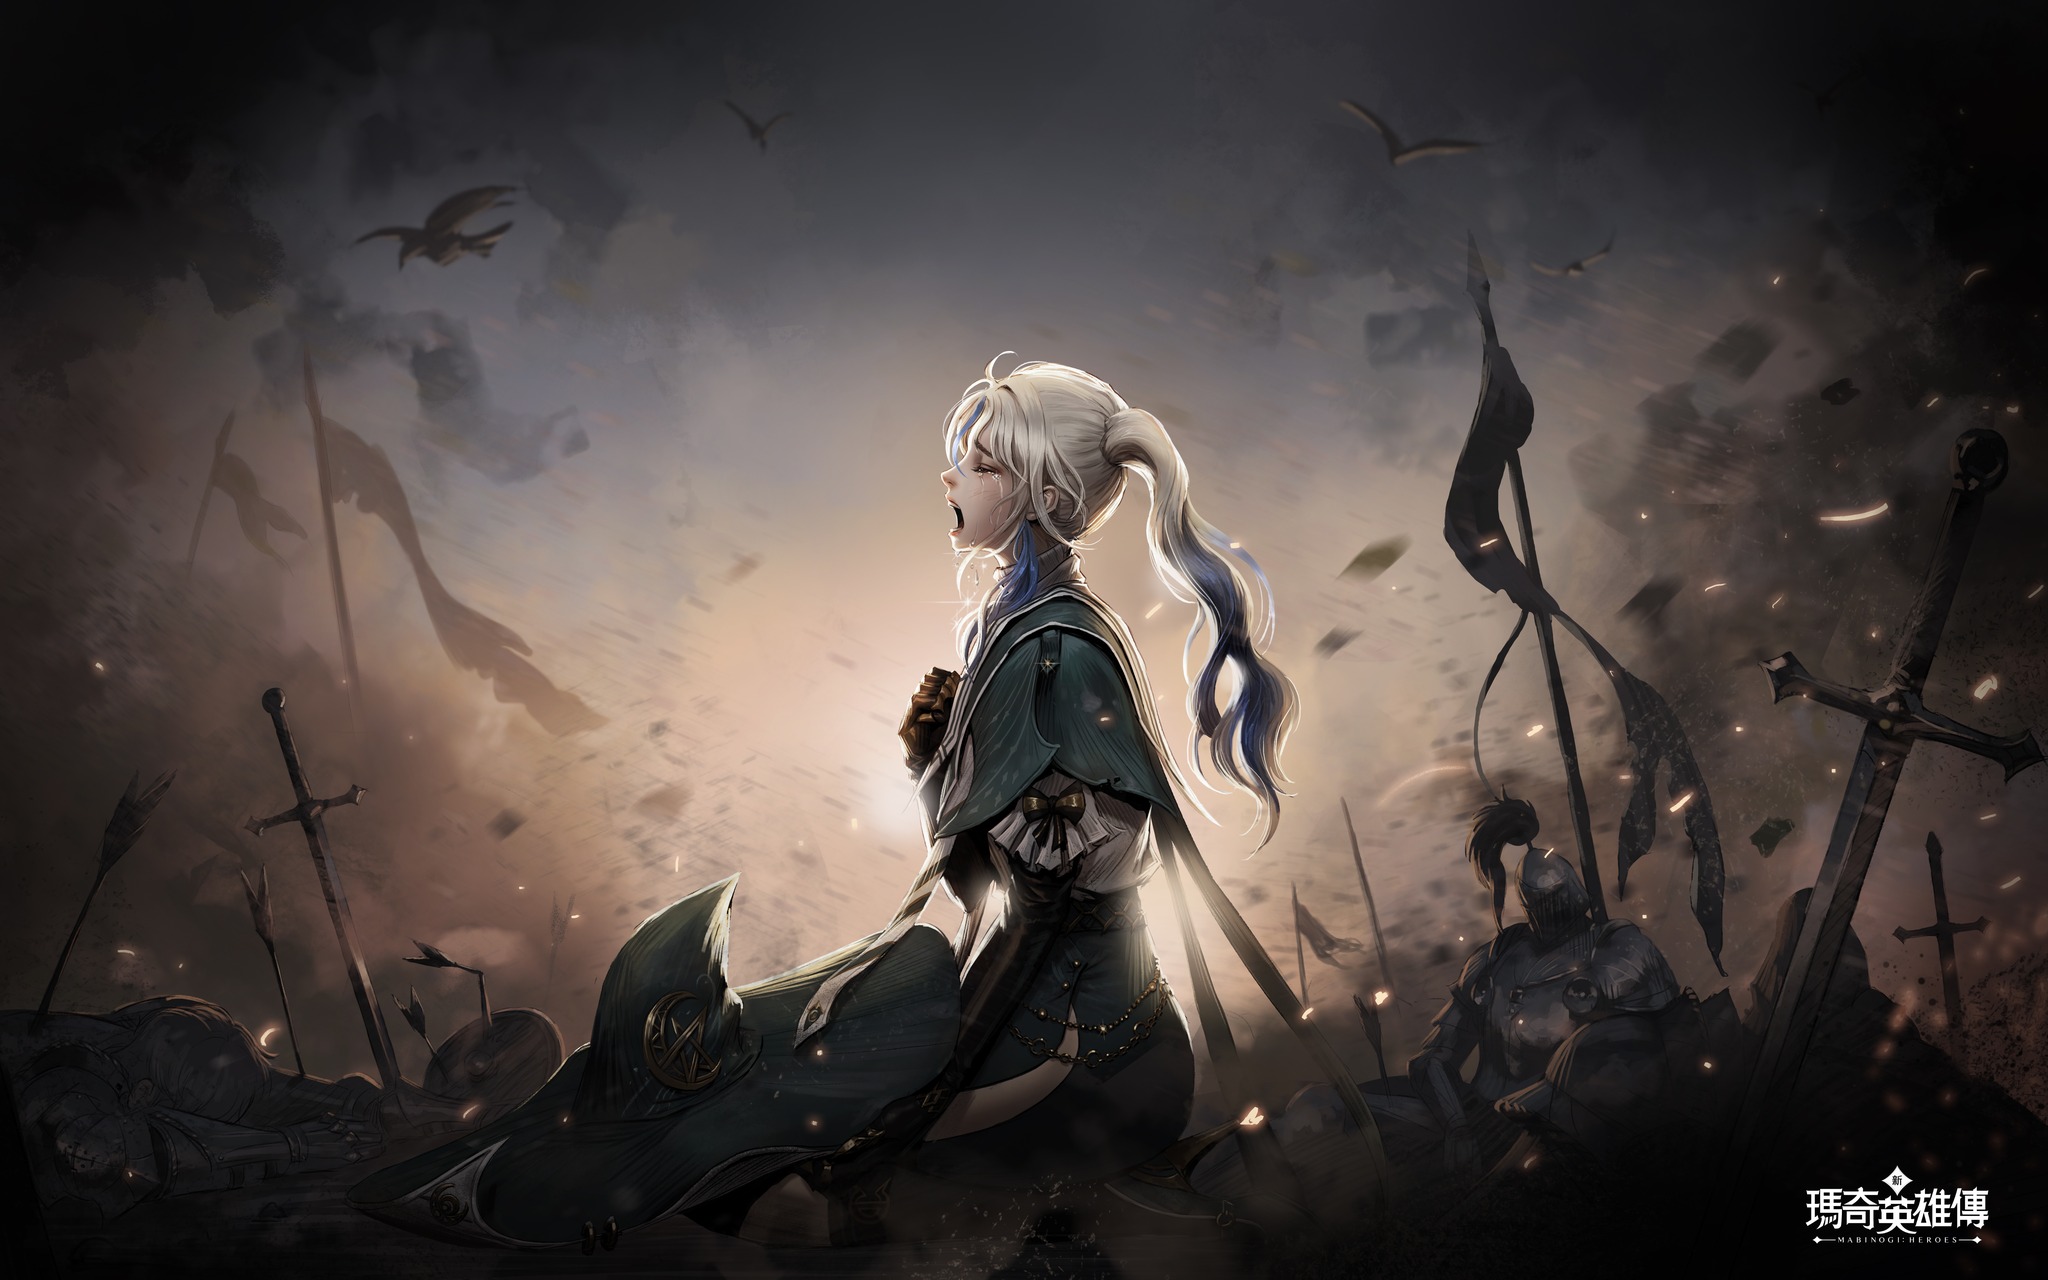 General 2048x1280 Mabinogi Heroes Vindictus Luo Qi Ying Xiong Zhuan video game characters video game art video games ponytail flag sword armor soldier crying tears video game girls sky open mouth people